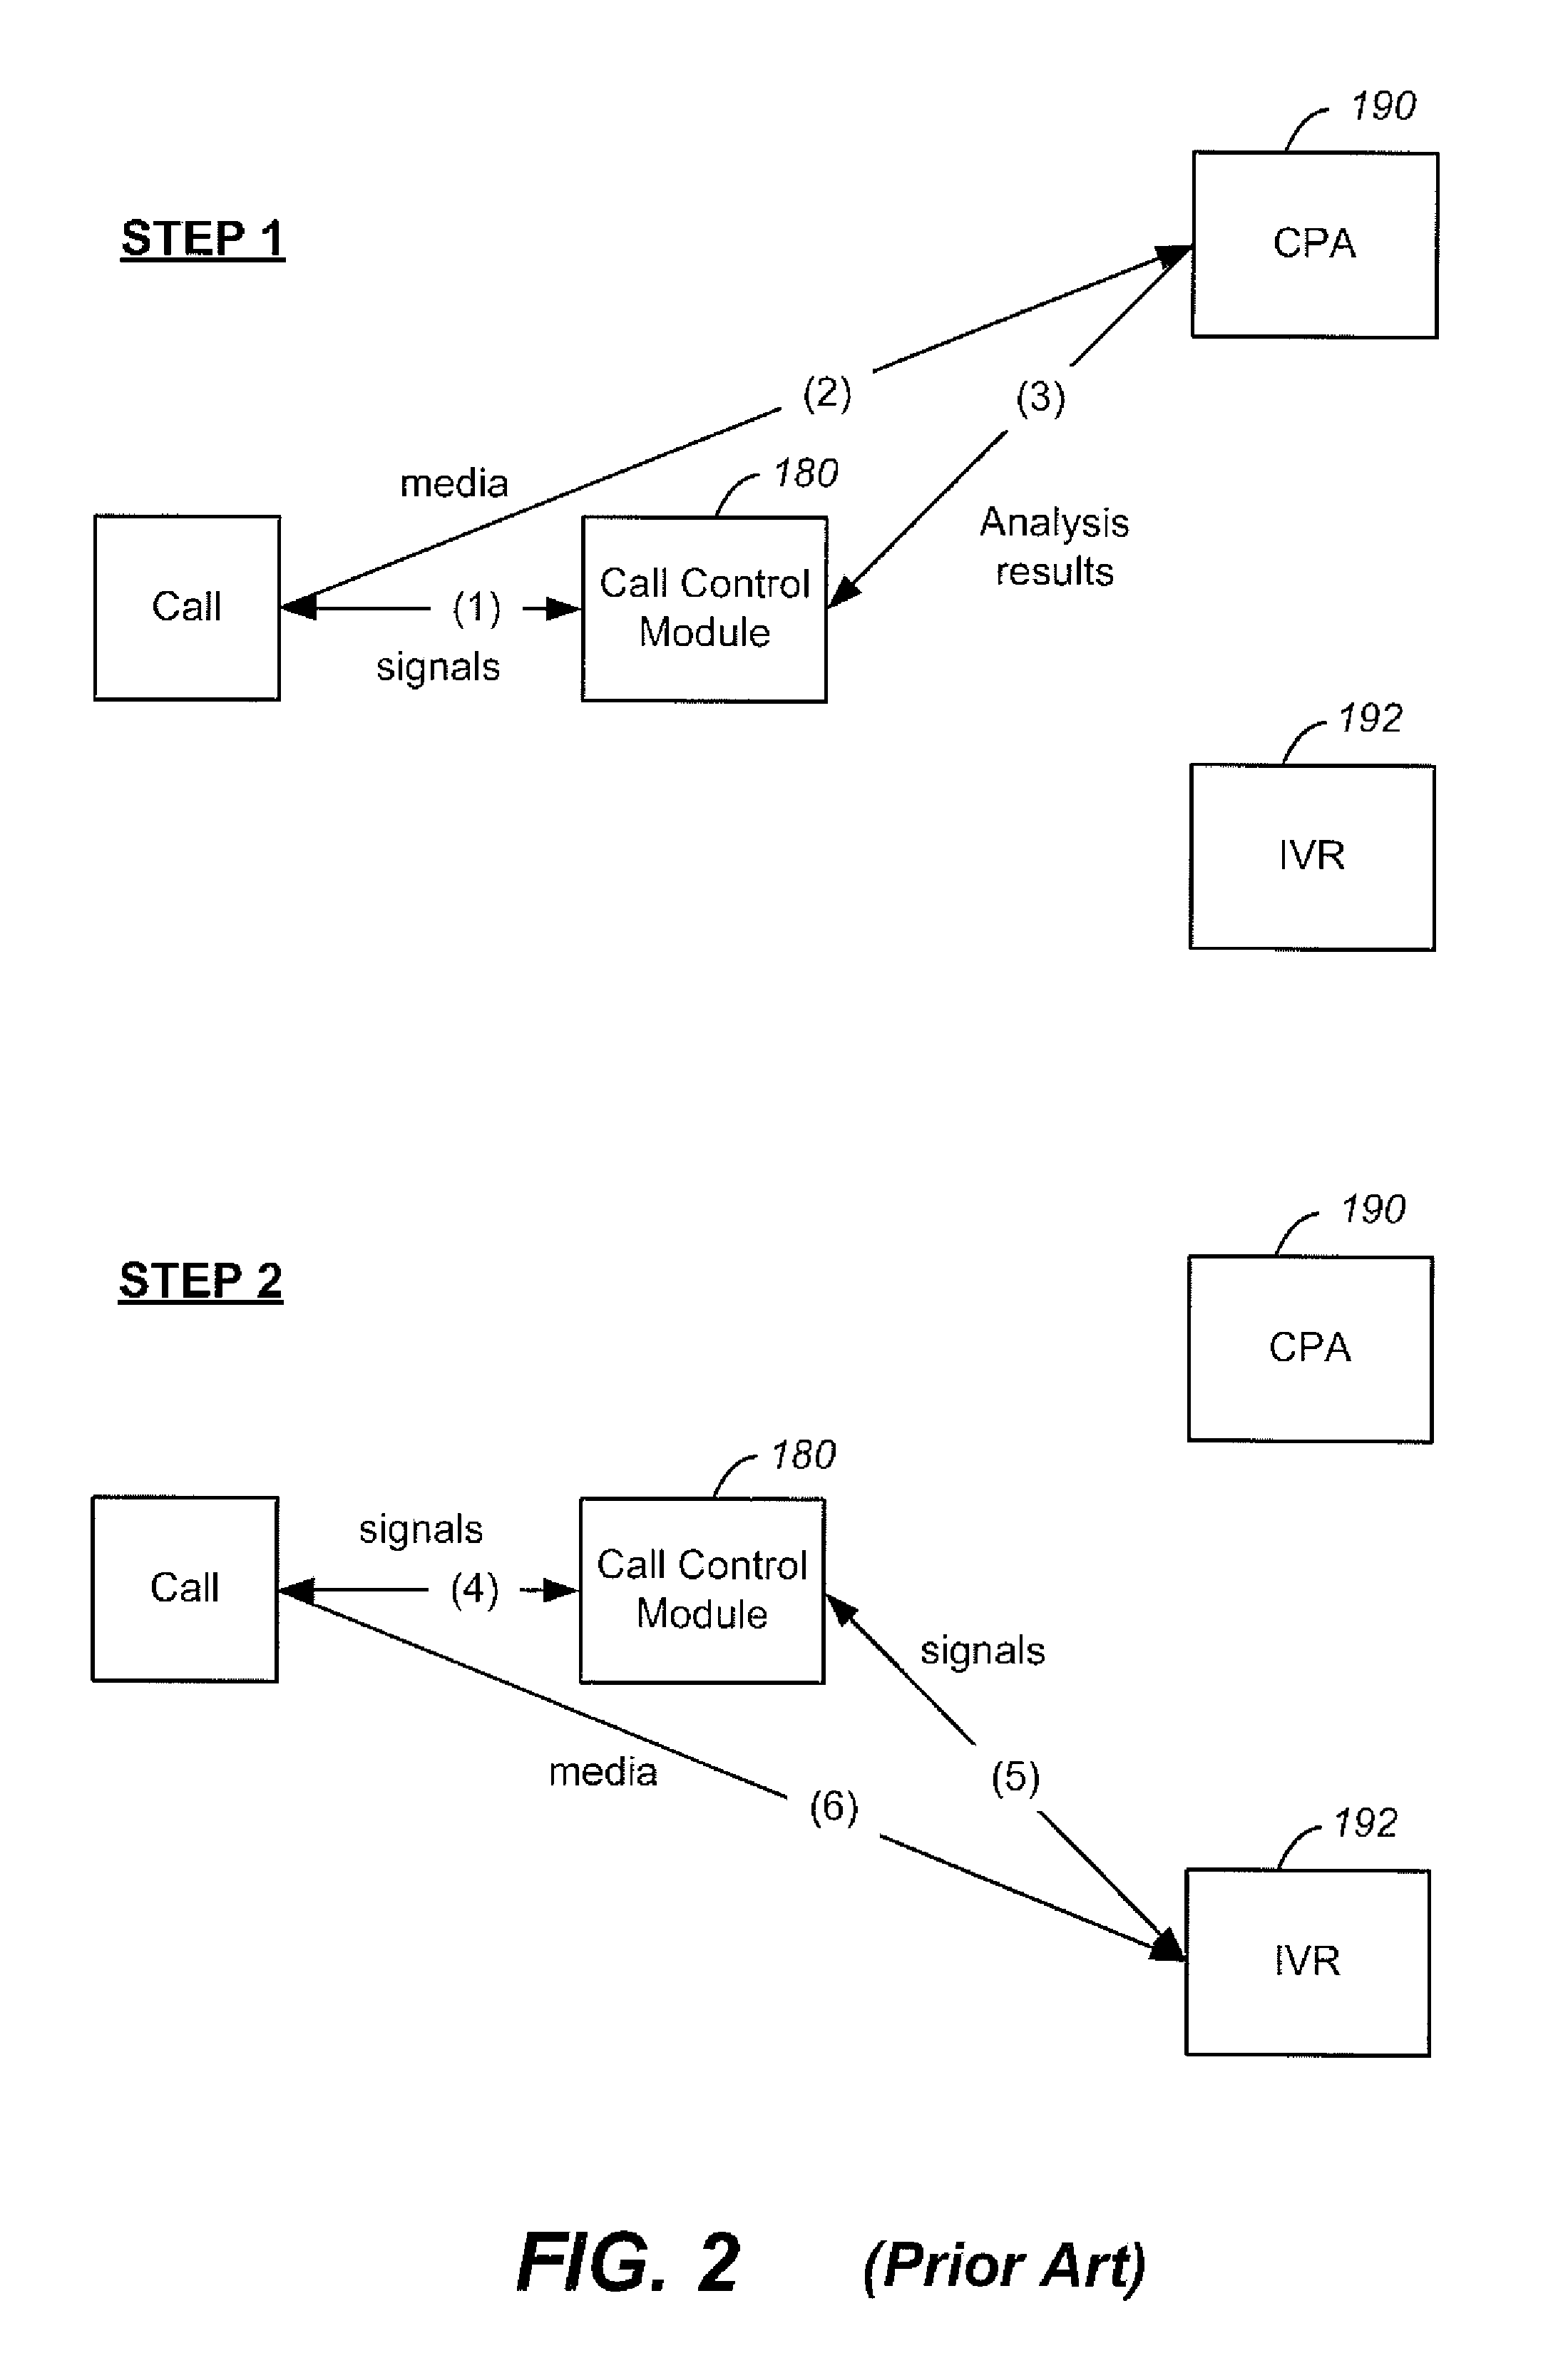 System and method for dynamic call-progress analysis and call processing